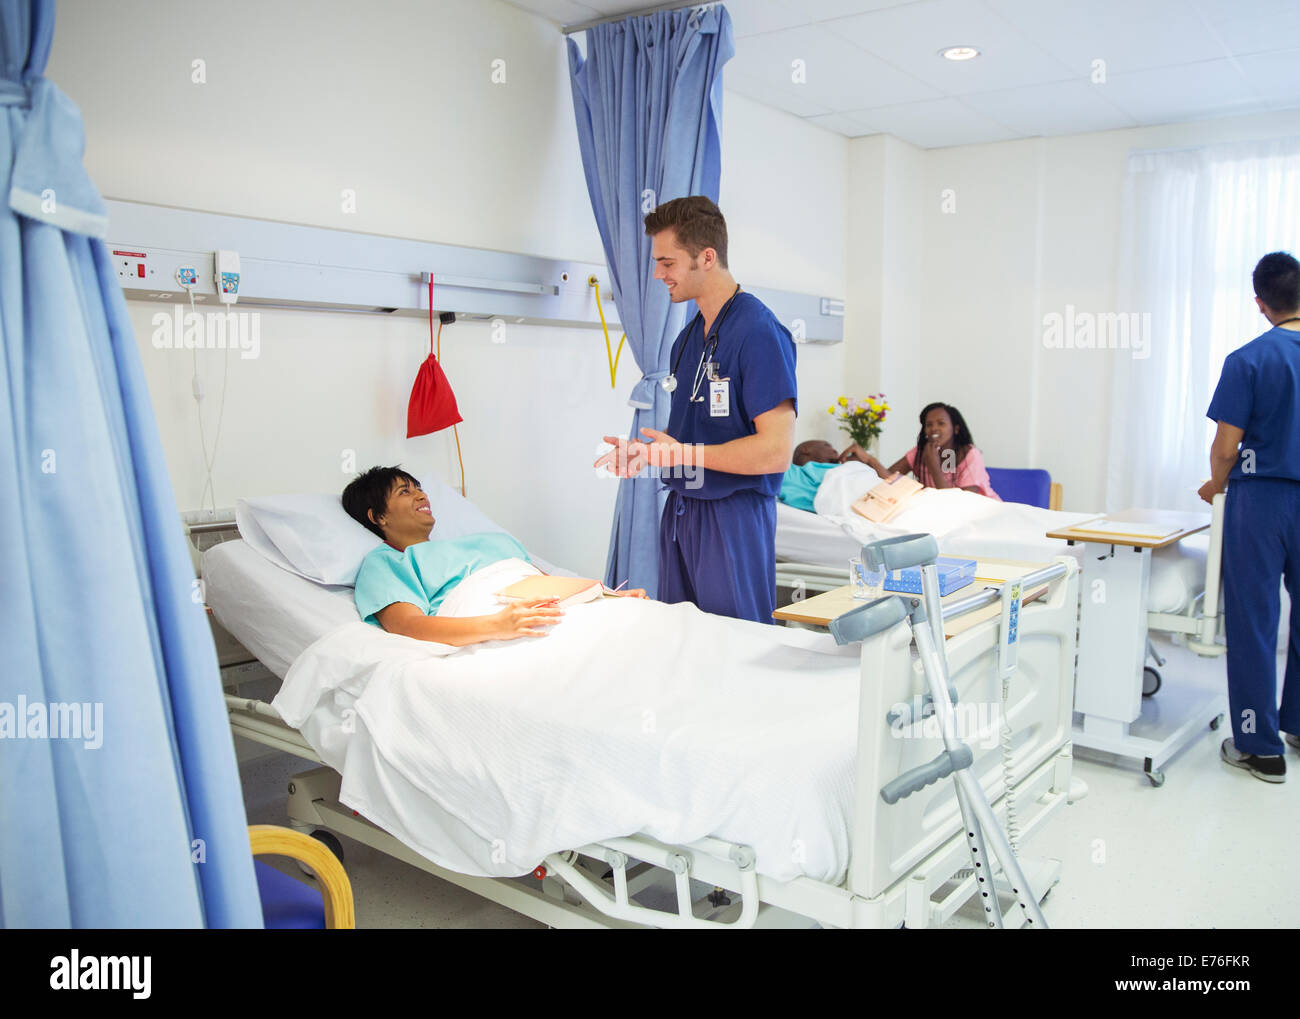 Nurse talking to patient in hospital room Stock Photo